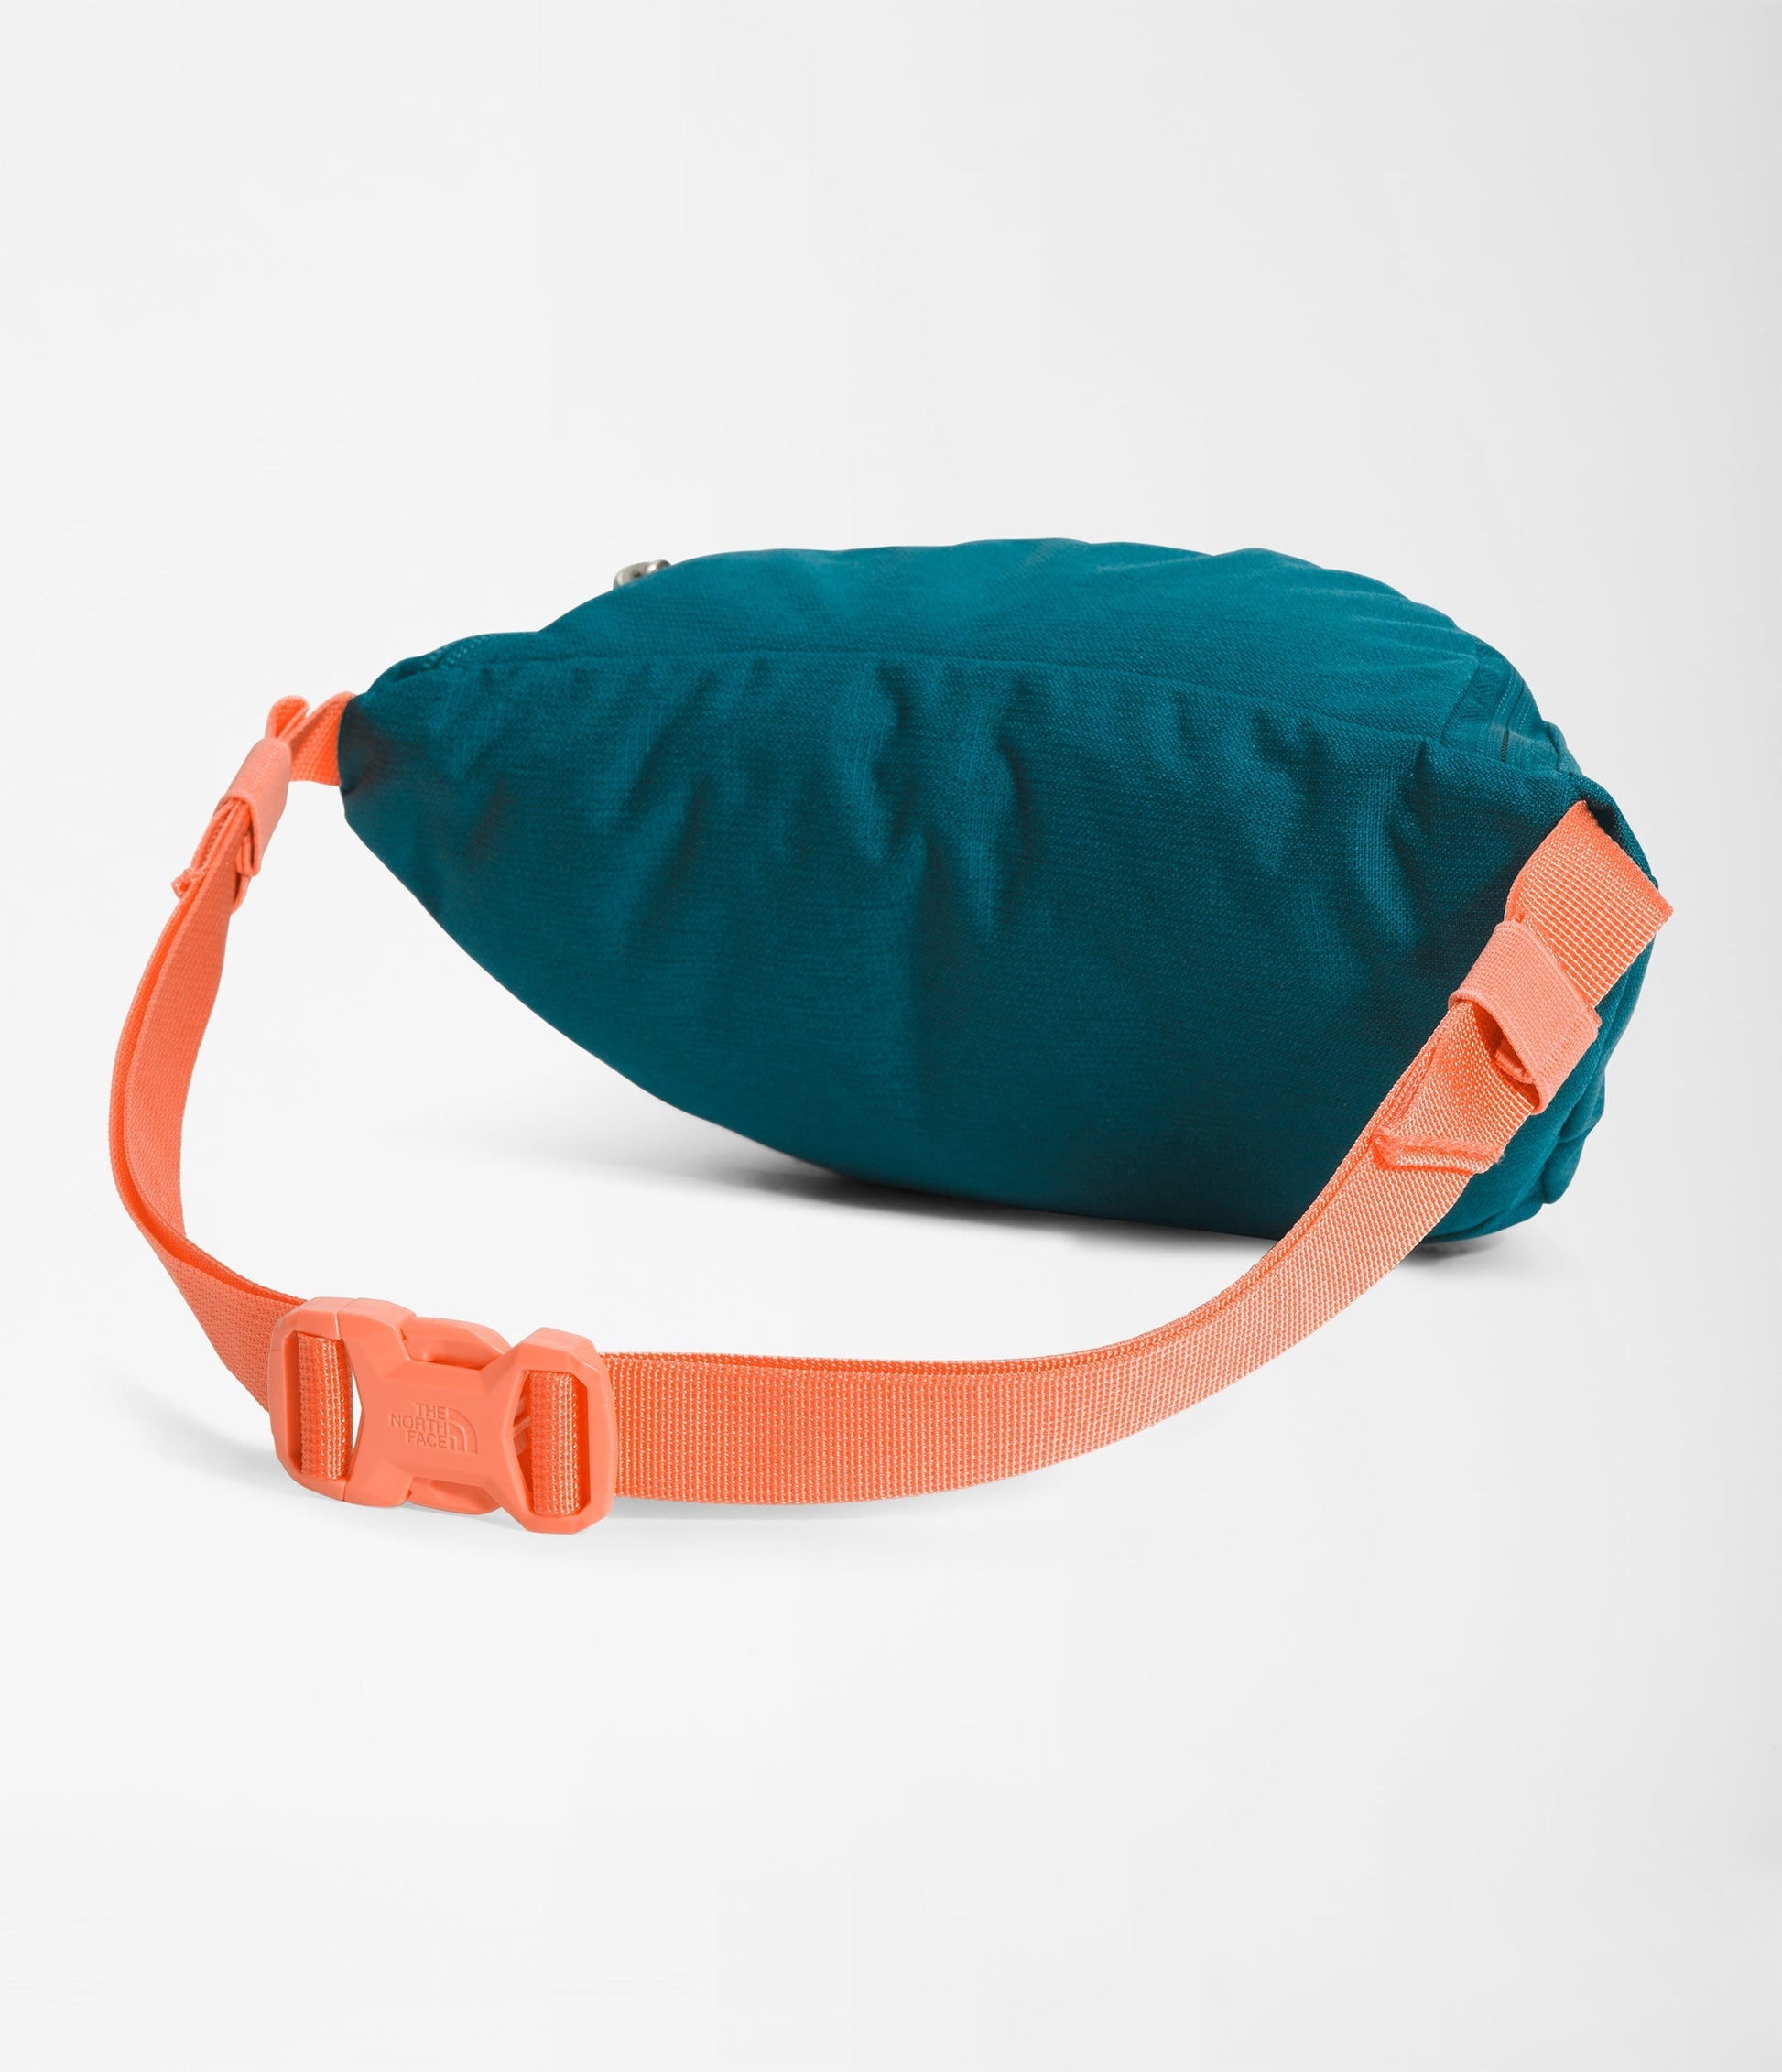 The North Face Jester Lumbar Pack - Blue Coral Light Heather/Gardenia White/Dusty Coral Orange